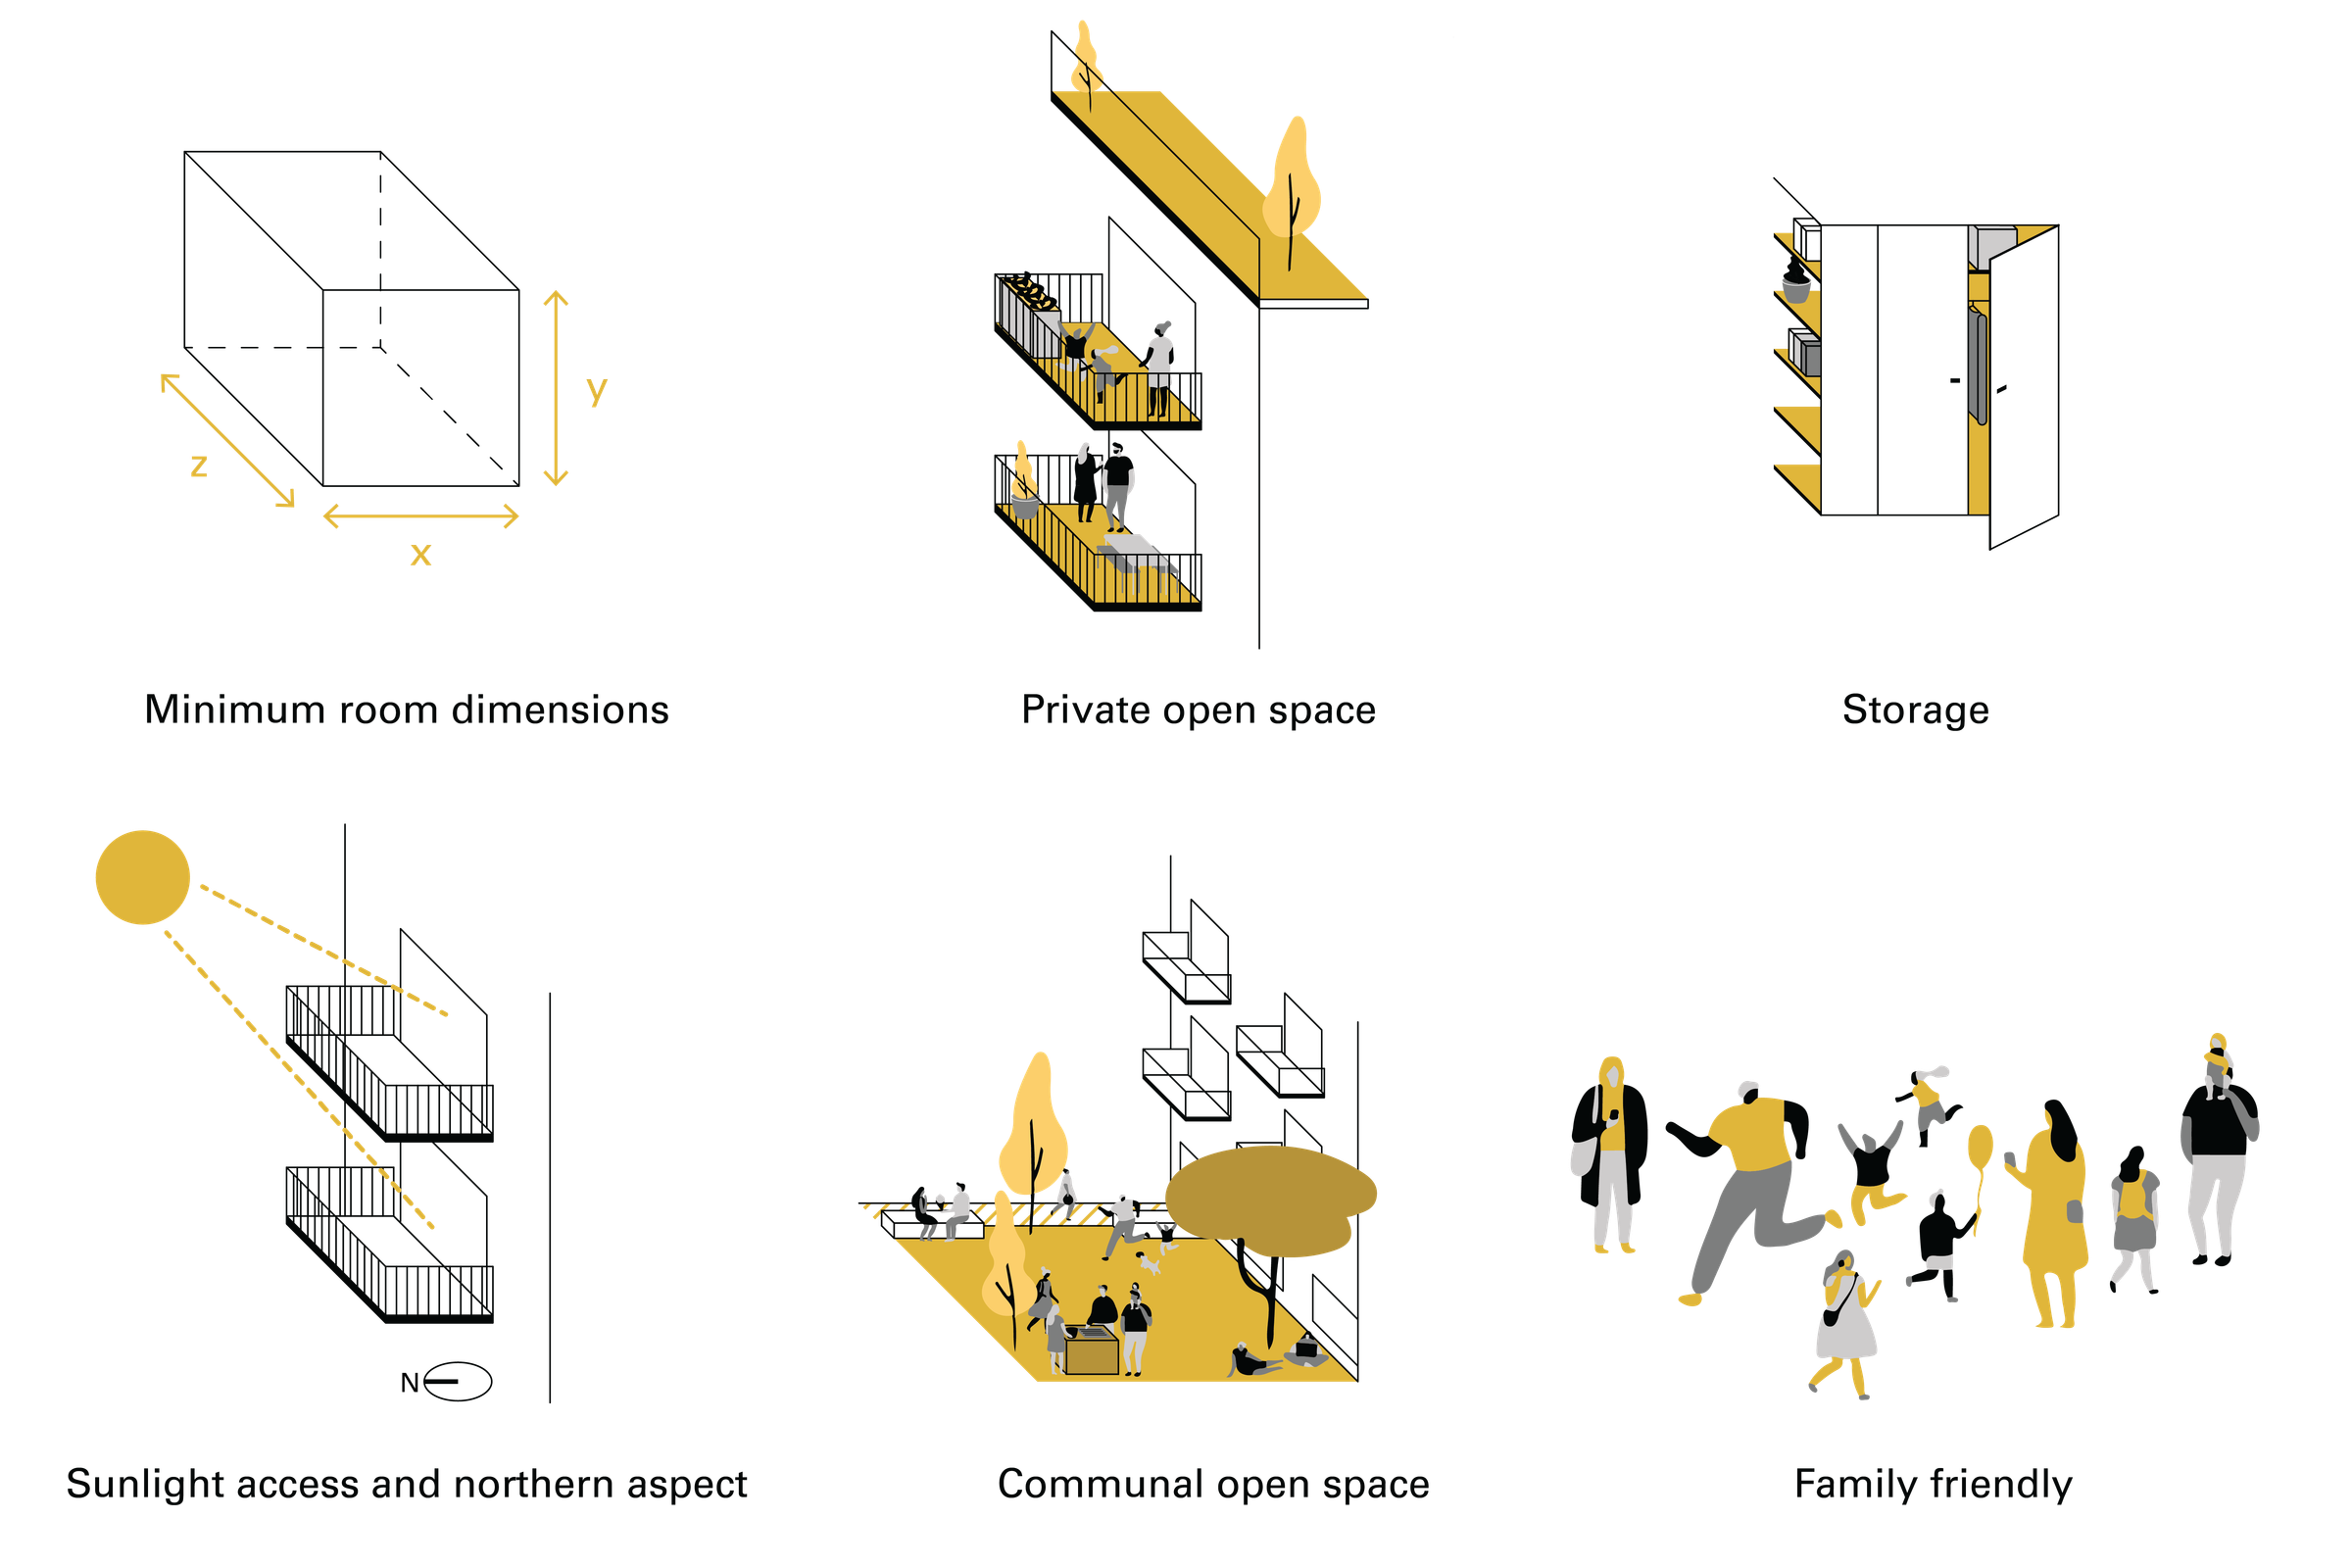 A series of six diagrams that illustrate some more prescriptive design requirements that should be included in the BADS policy, these include minimum room dimensions, private open space, storage, sunlight access and northern aspect, communal open space, and family friendly design features.